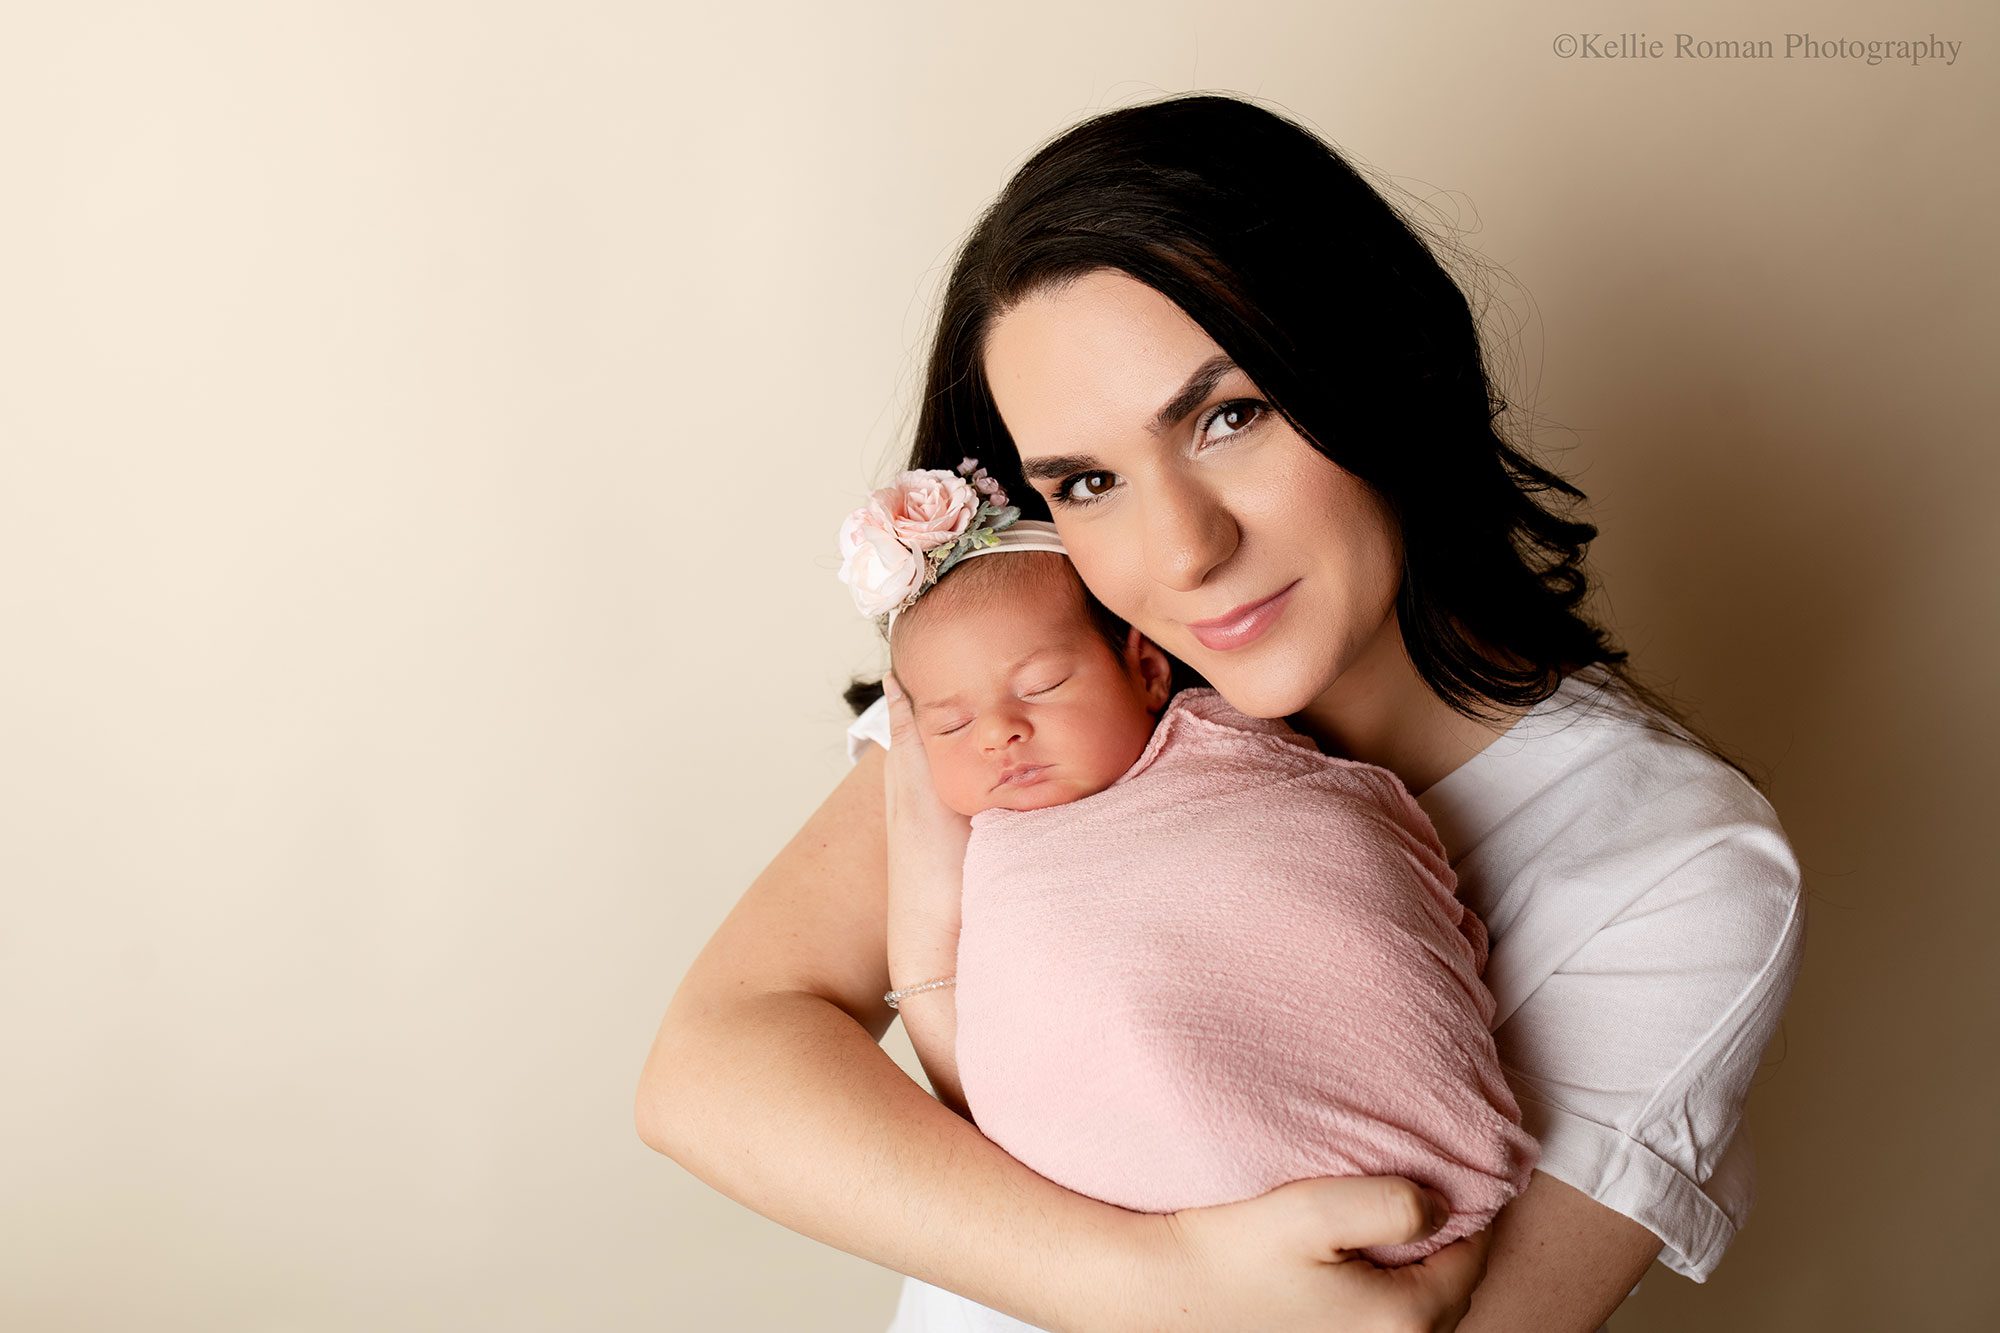 new mother is in milwaukee photography studio. she's holding onto her newborn baby daughter. the mom is wearing a white shirt and looking at the camera. she has very dark hair. the baby is in a light pink swaddle with a floral pink headband.
